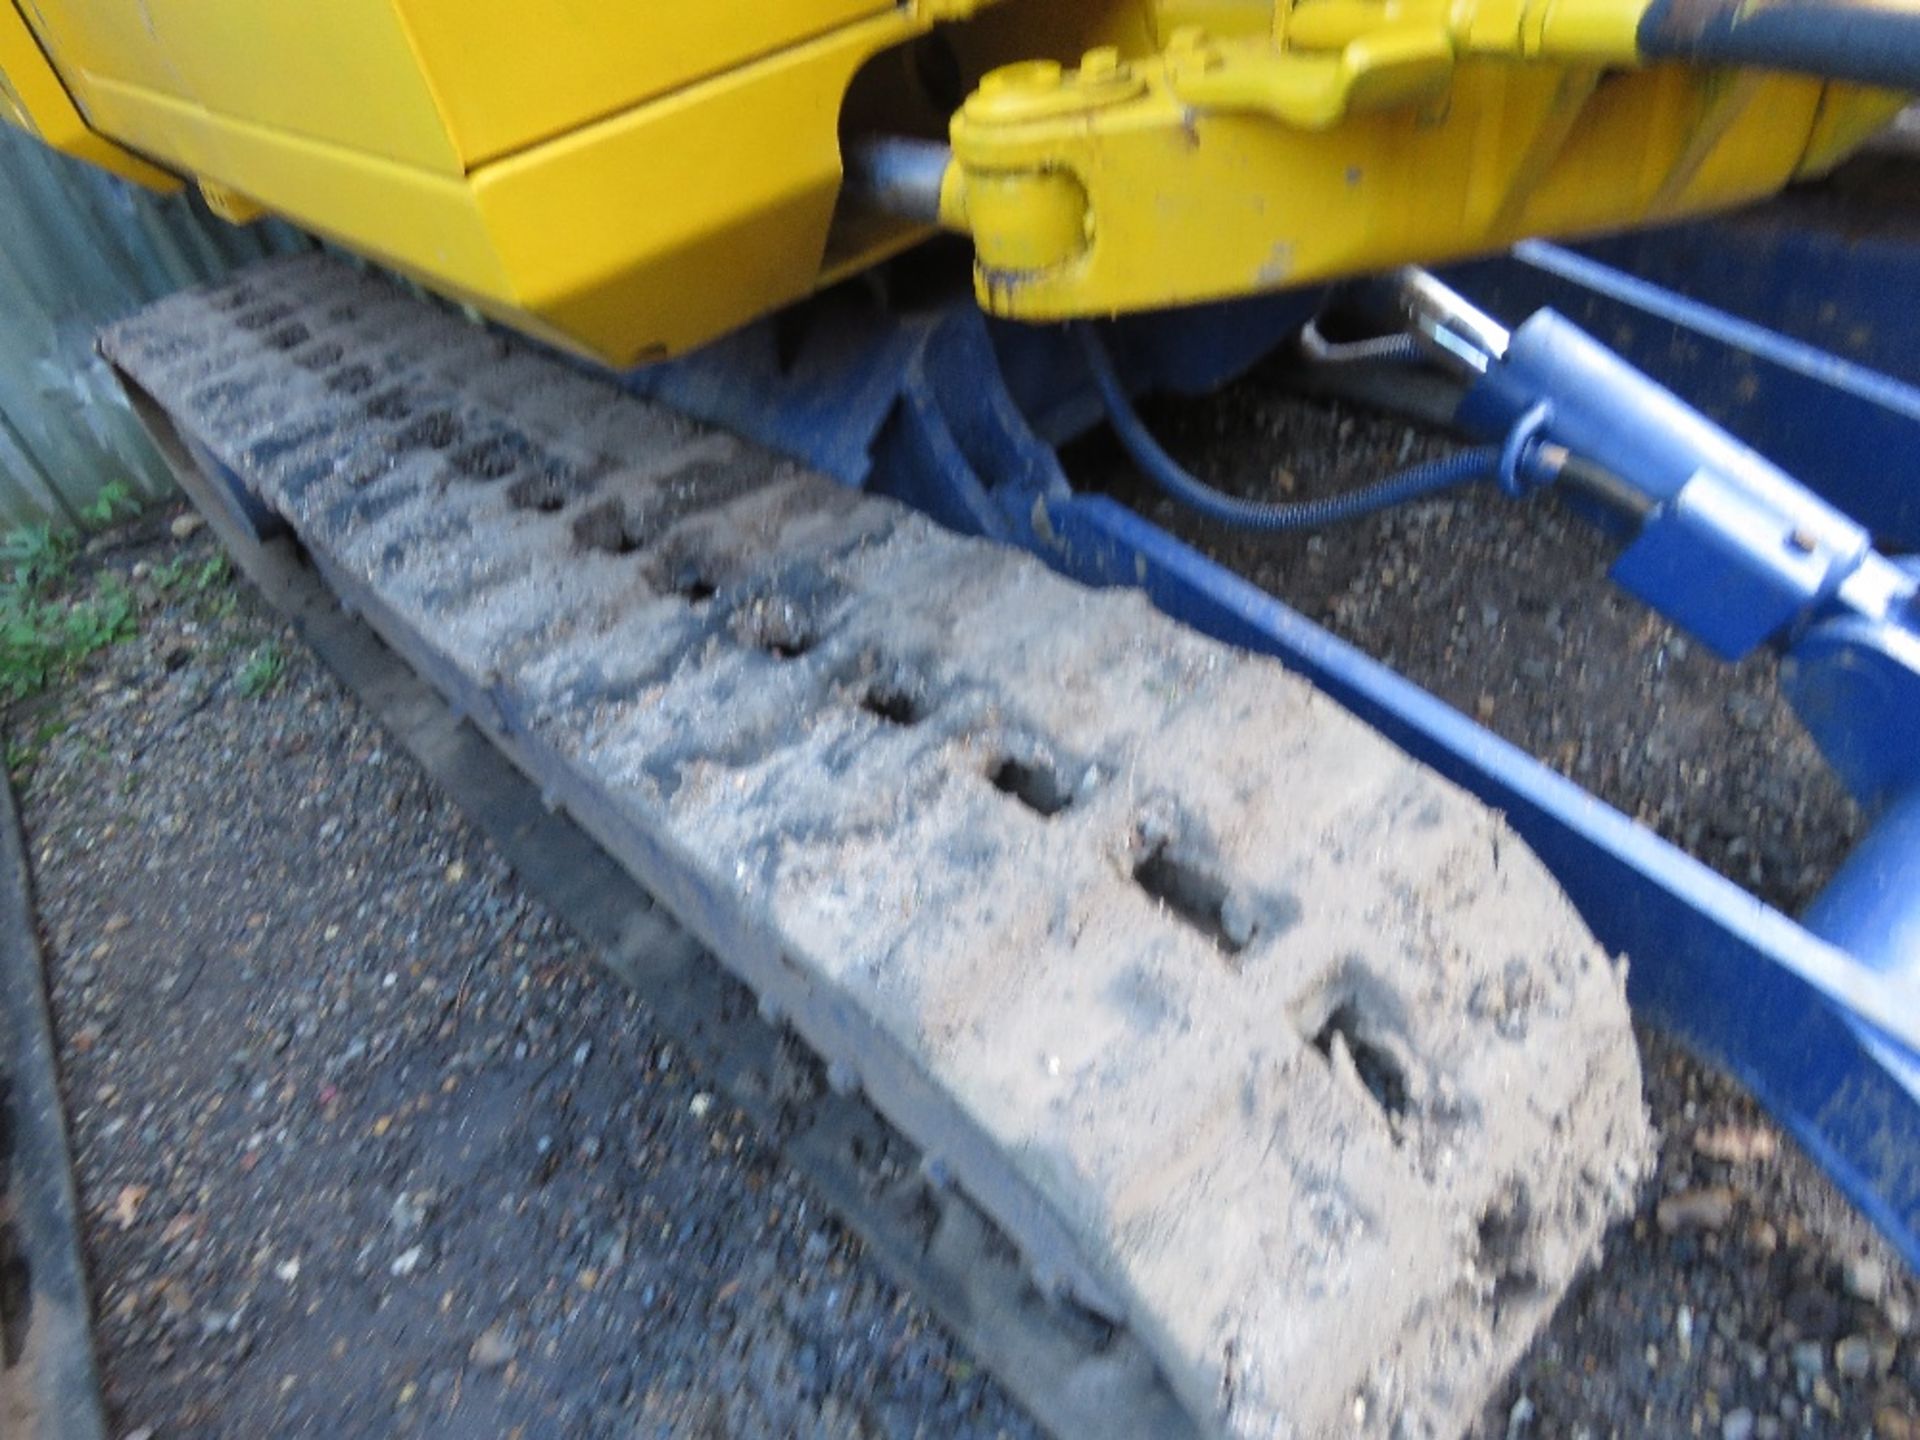 KOMATSU PC20 RUBBER TRACKED MINI DIGGER WITH BUCKETS. SN: F10413. WHEN TESTED WAS SEEN TO DRIVE, SLE - Image 8 of 17